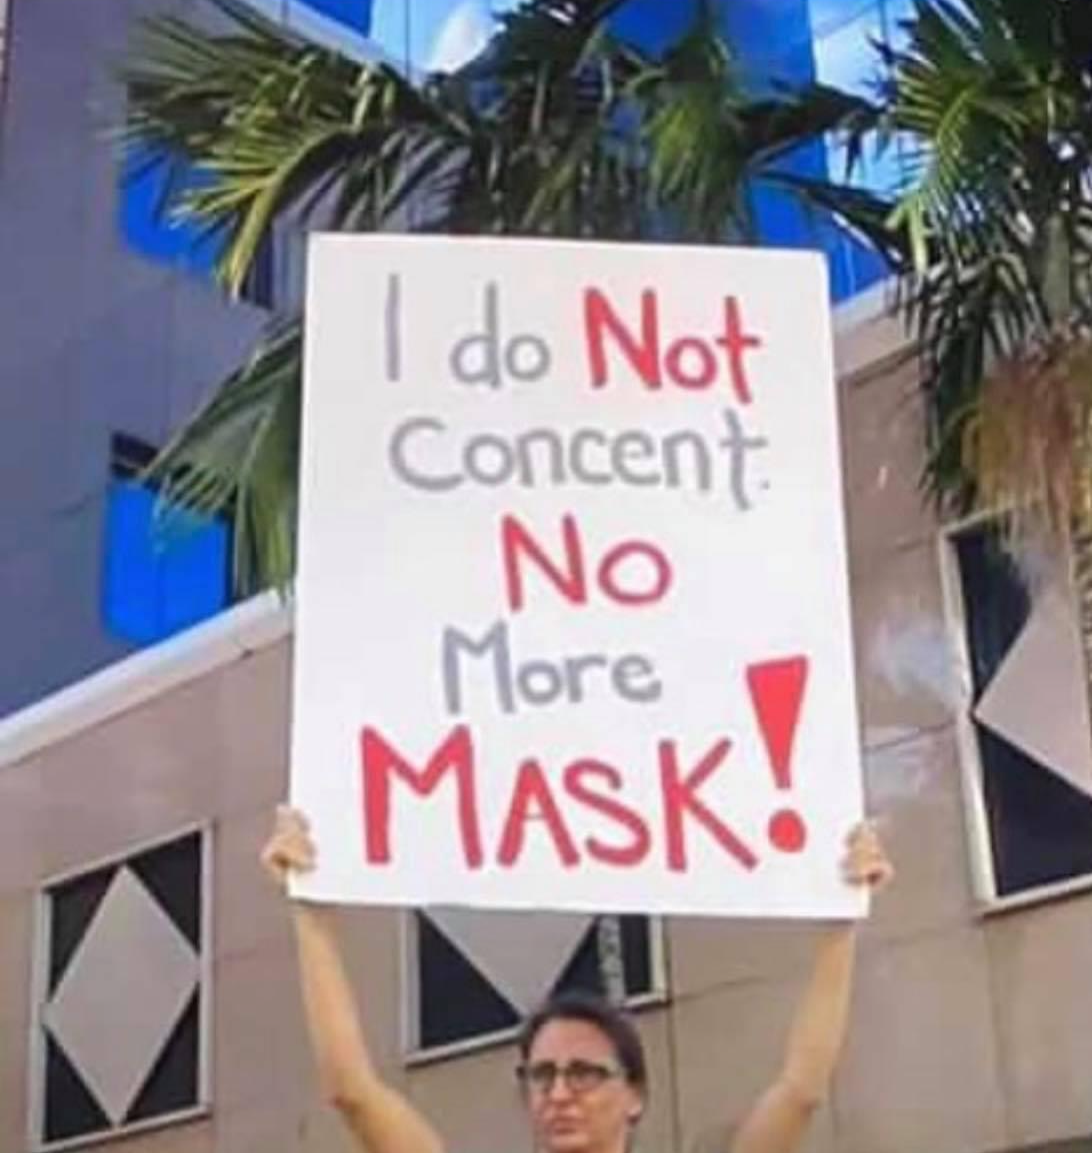 High Quality I do not concent no more mask Blank Meme Template